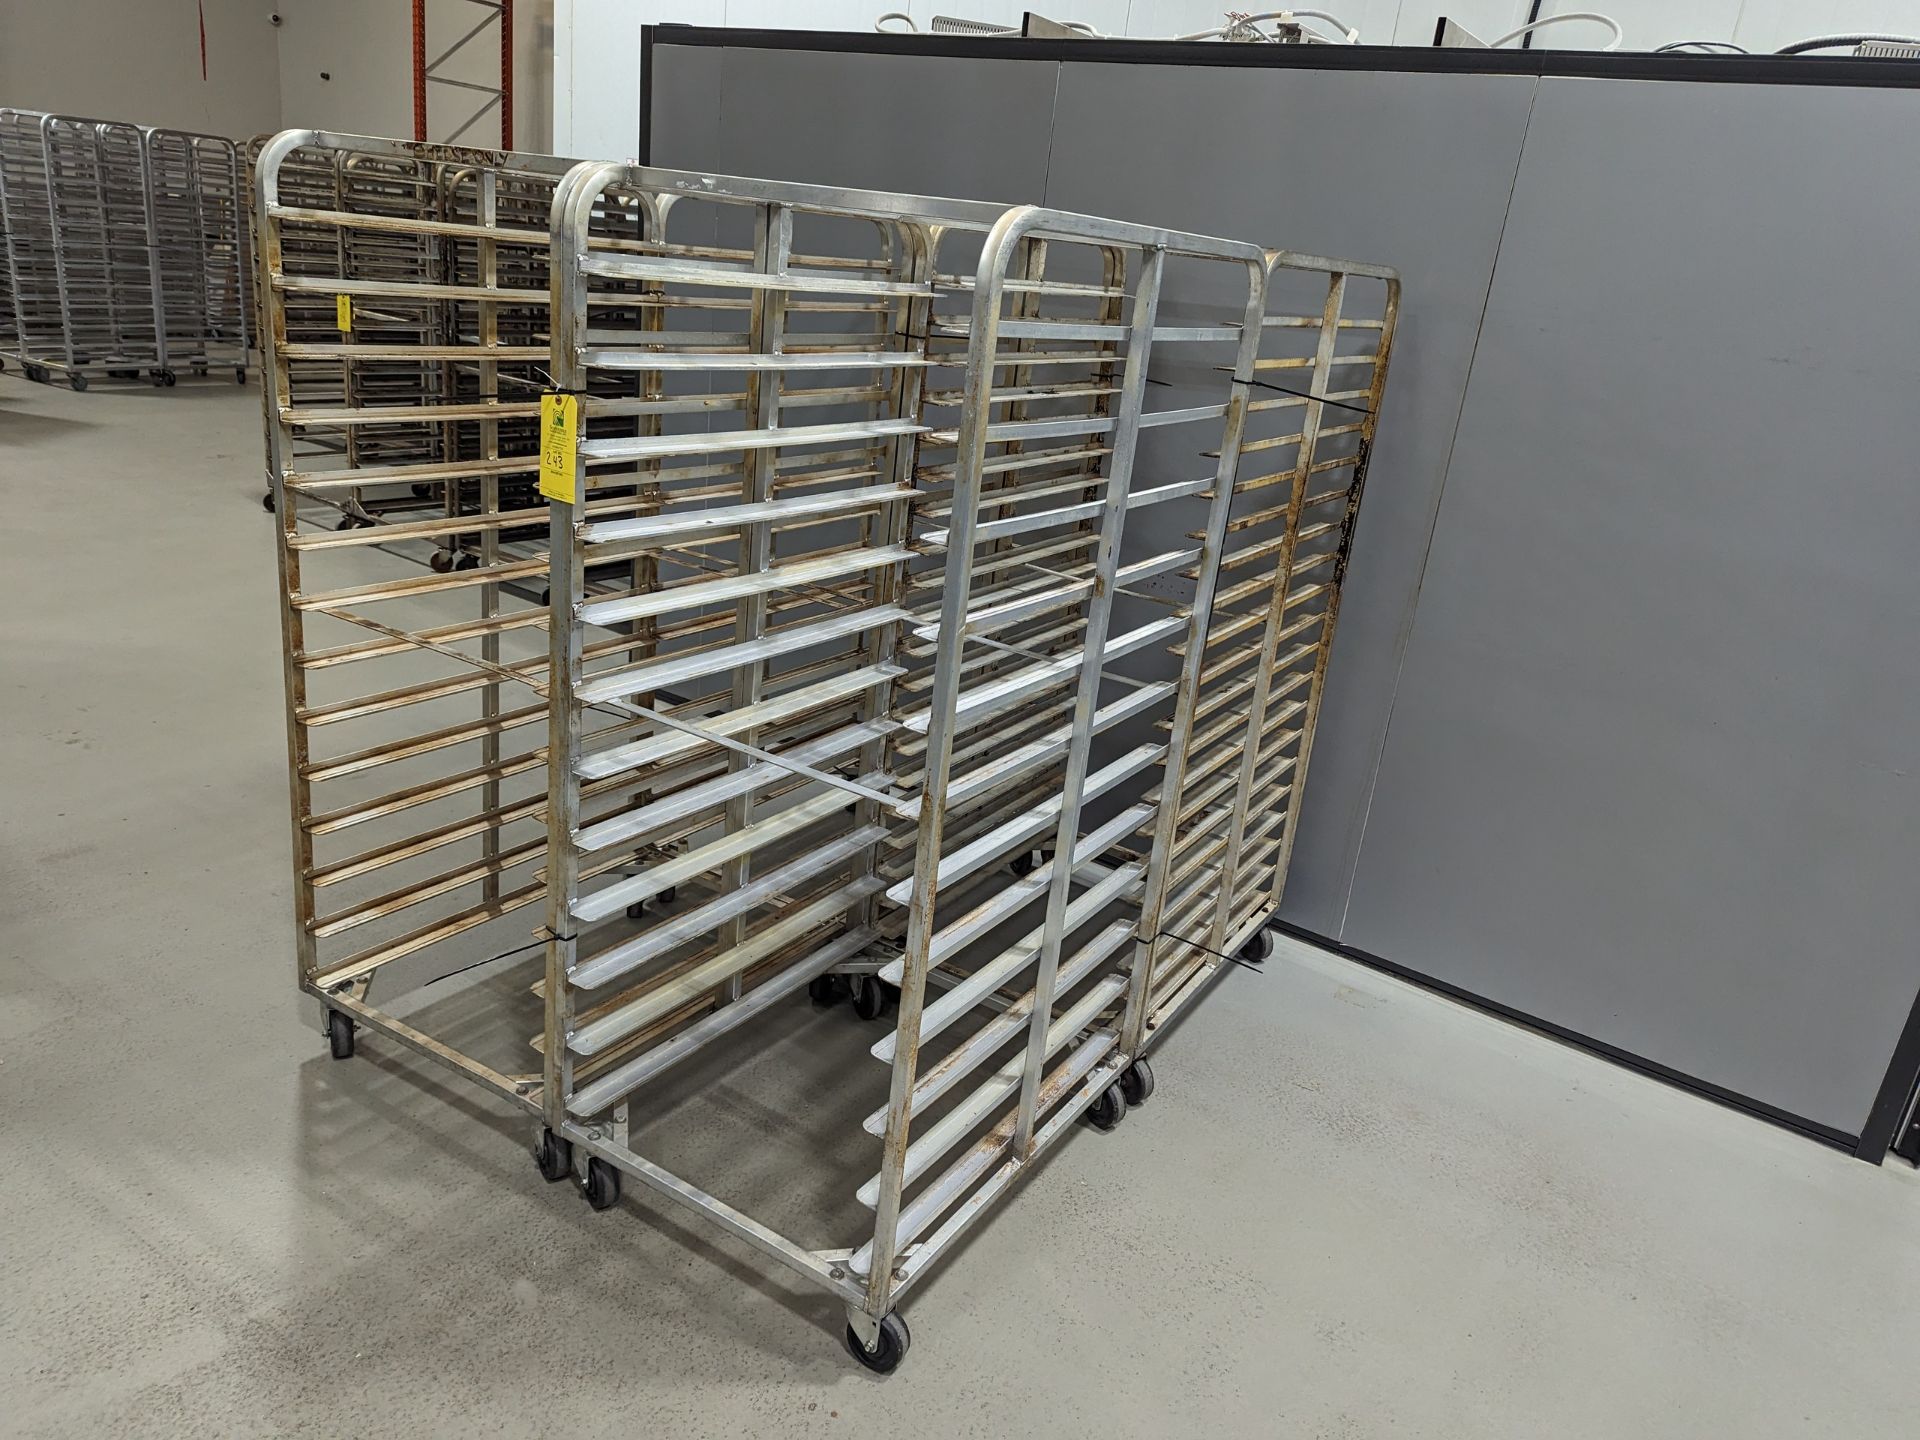 Lot of 4 Double Wide Aluminum Bakery Racks, Dimensions LxWxH: 72x57x69 Measurements are for lot of - Image 2 of 6